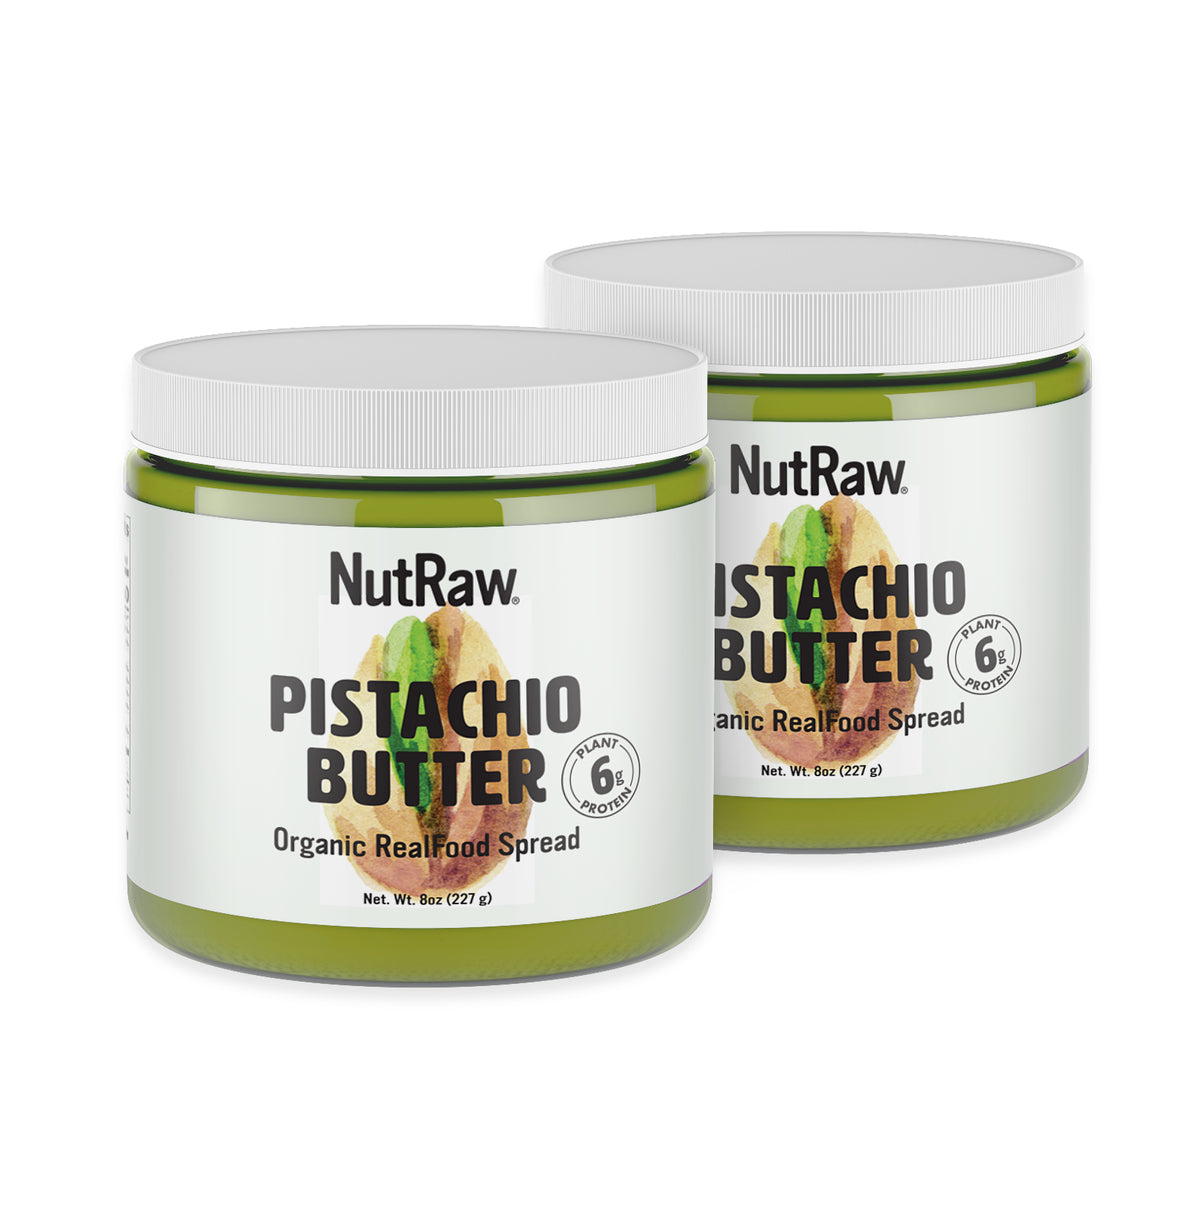 Organic Pistachio Butters - Pack of 2 (8oz each)